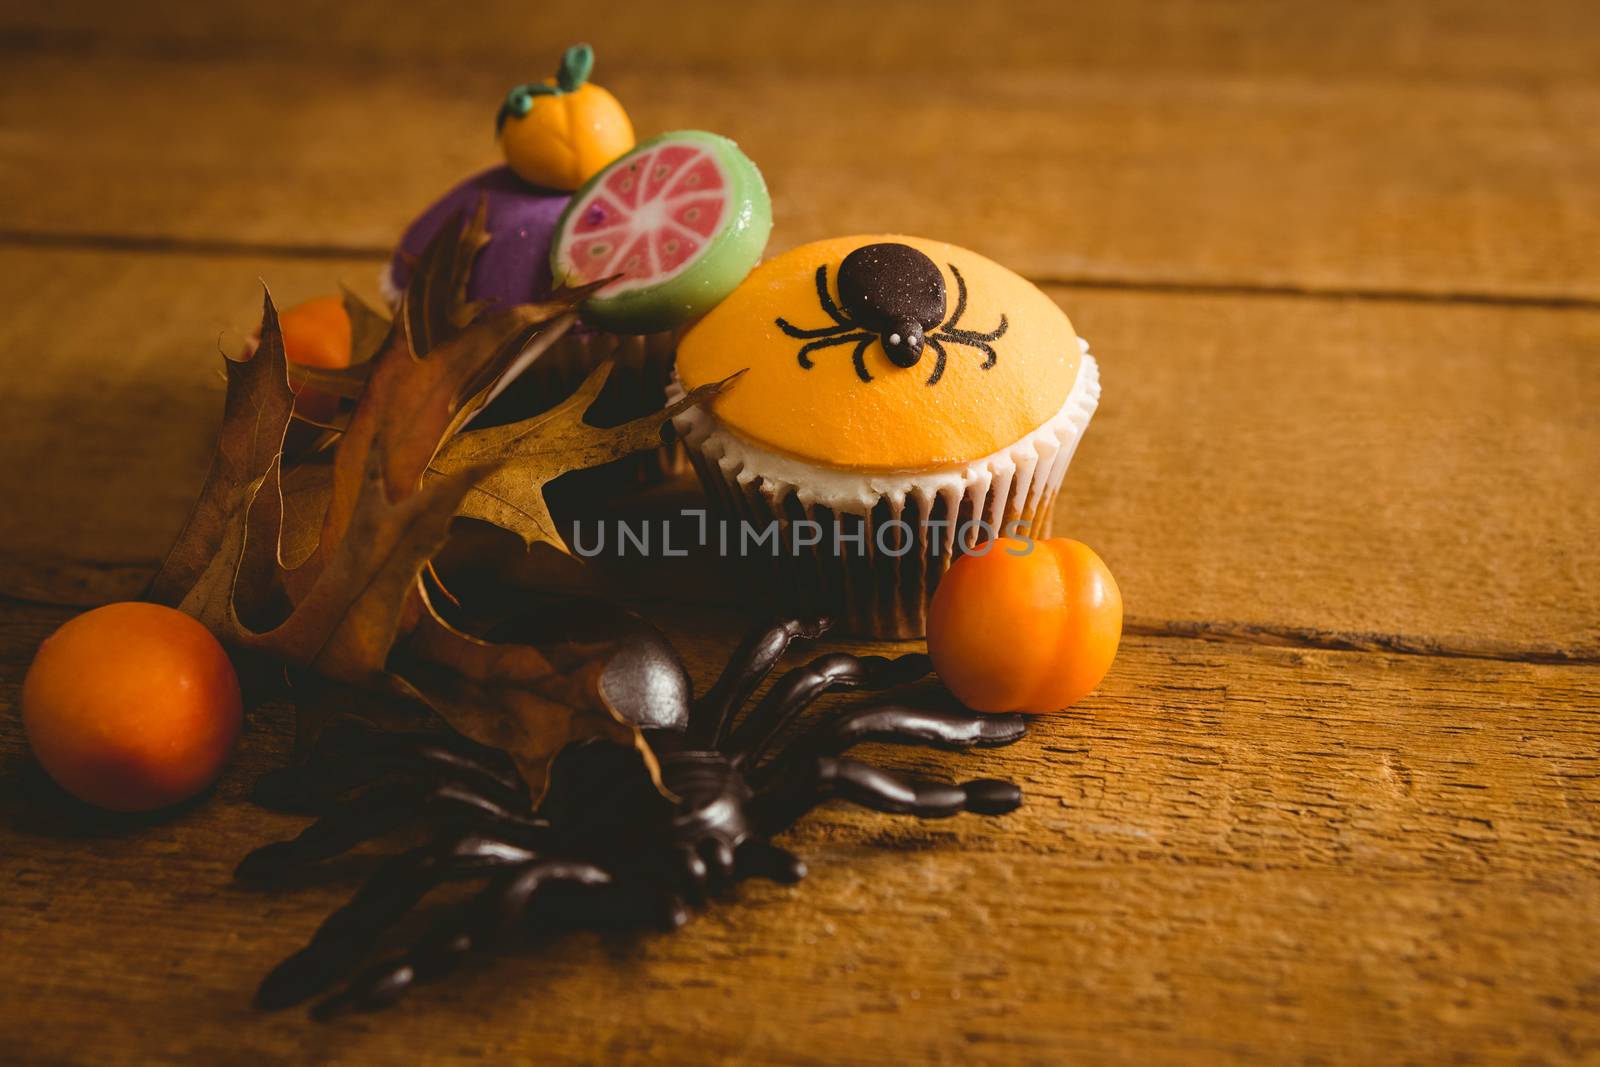 Halloween decorations with cup cake on table by Wavebreakmedia